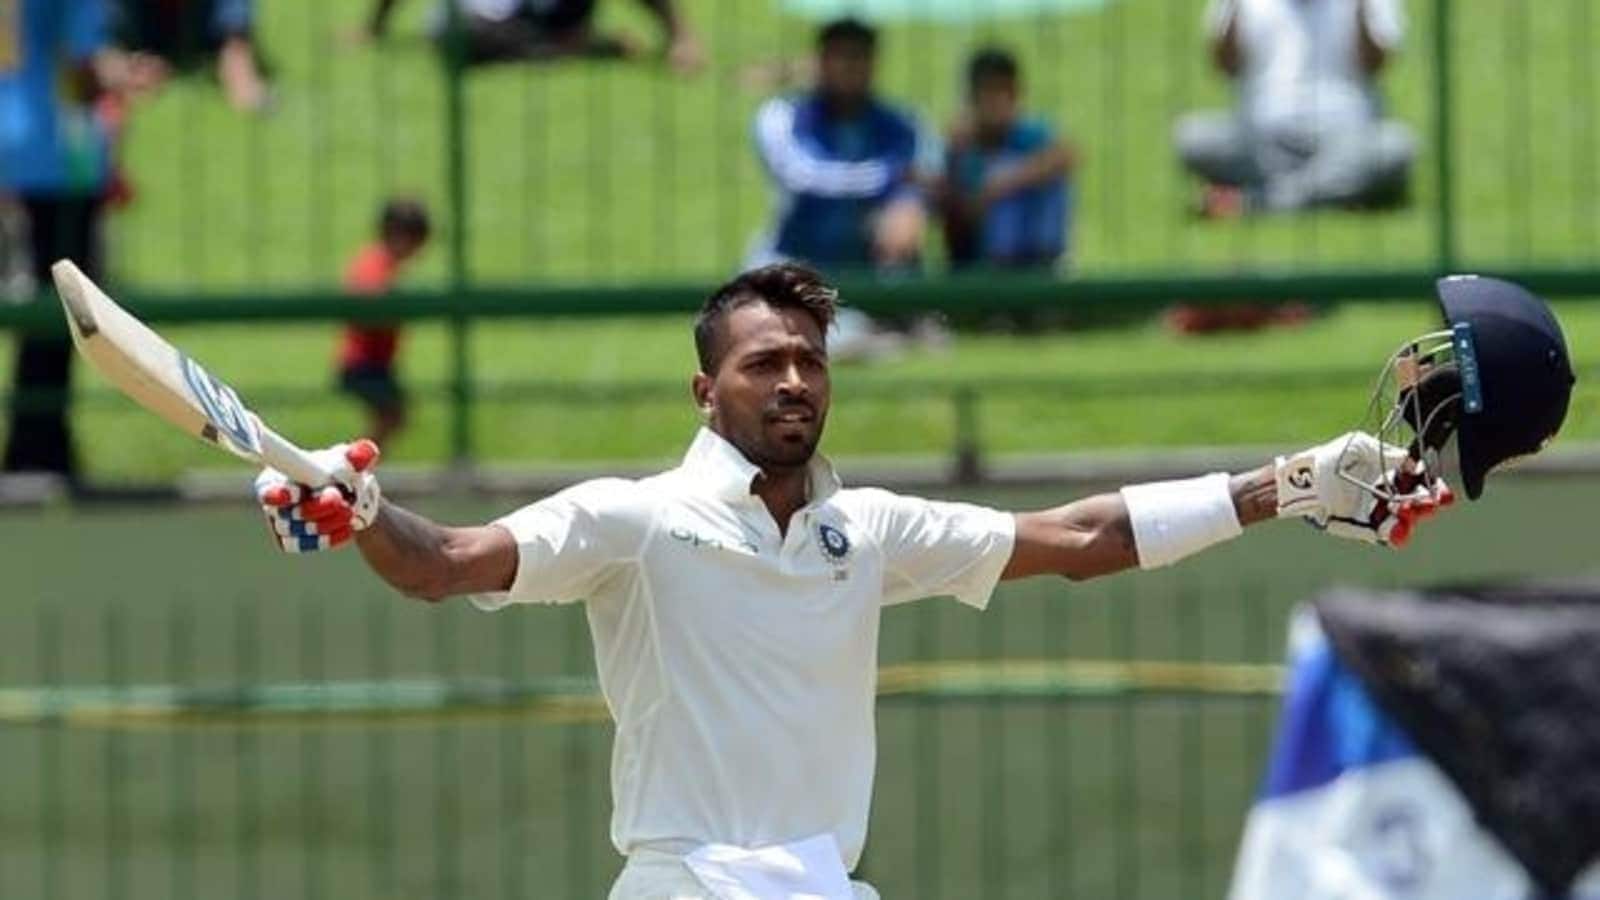 Nasser Hussain, Ponting Reveal Hardik Pandya Was Contacted For WTC Final: 'Just A One-Off Test For Balance Of Side...?'